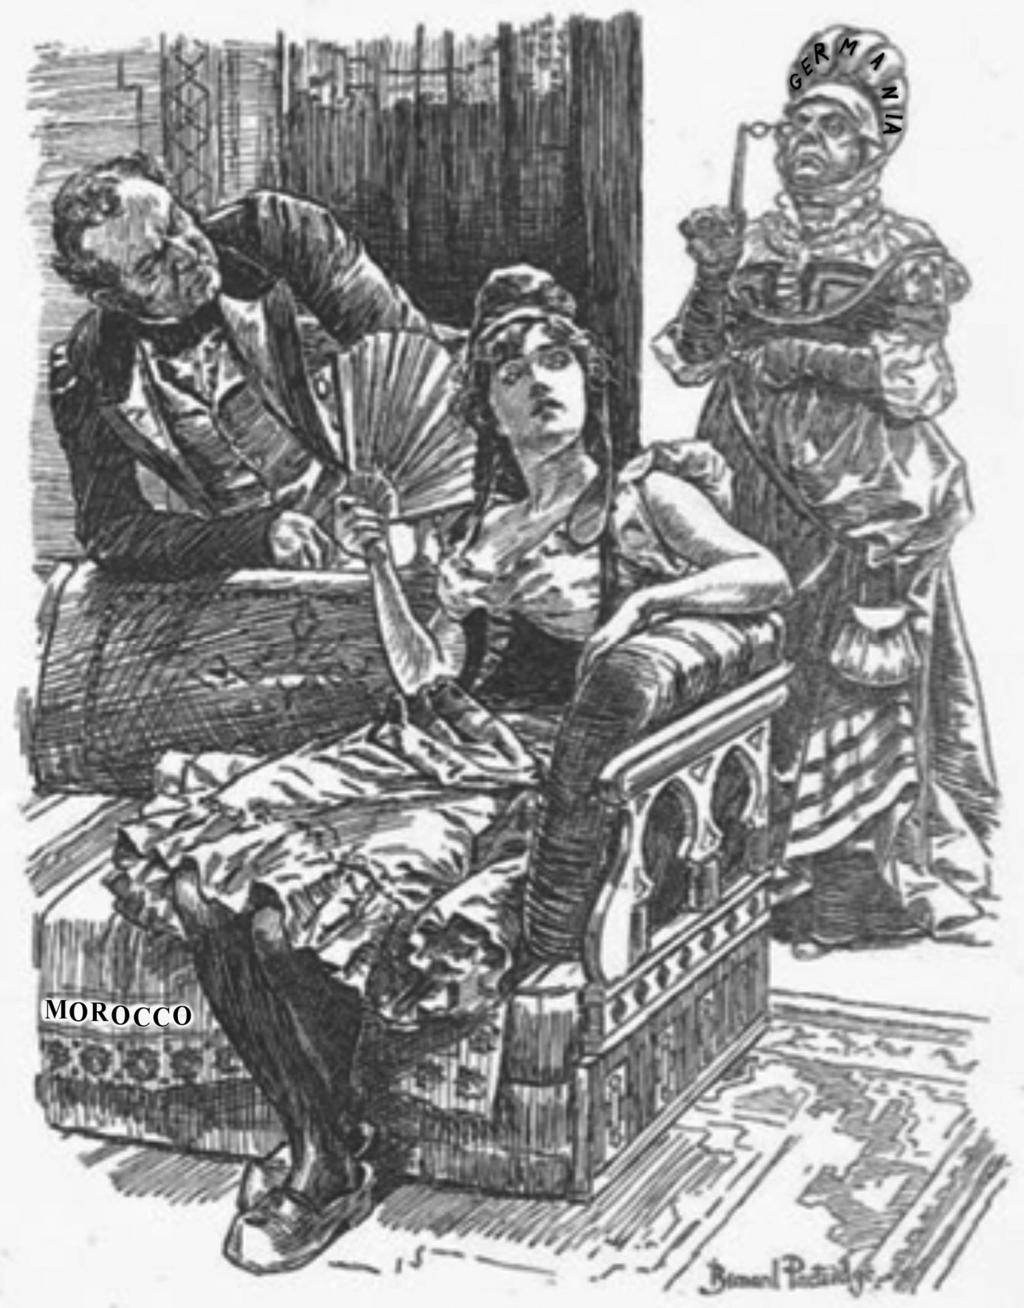 SOURCE C A British cartoon published in April 1905.